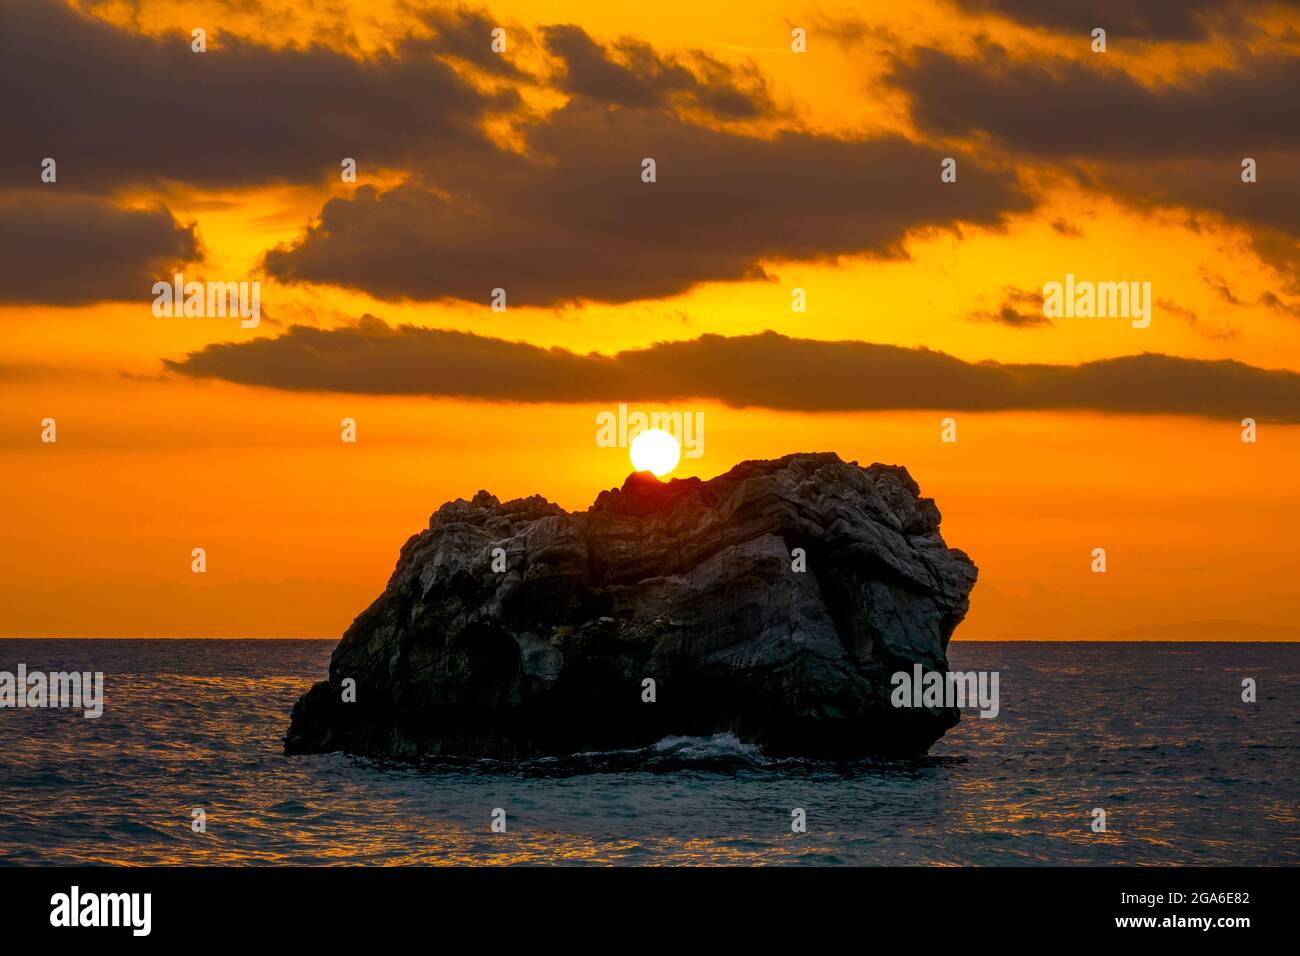 Coastal stones in the calm sea. Bright sunset colors in cloudy skies Stock Photo